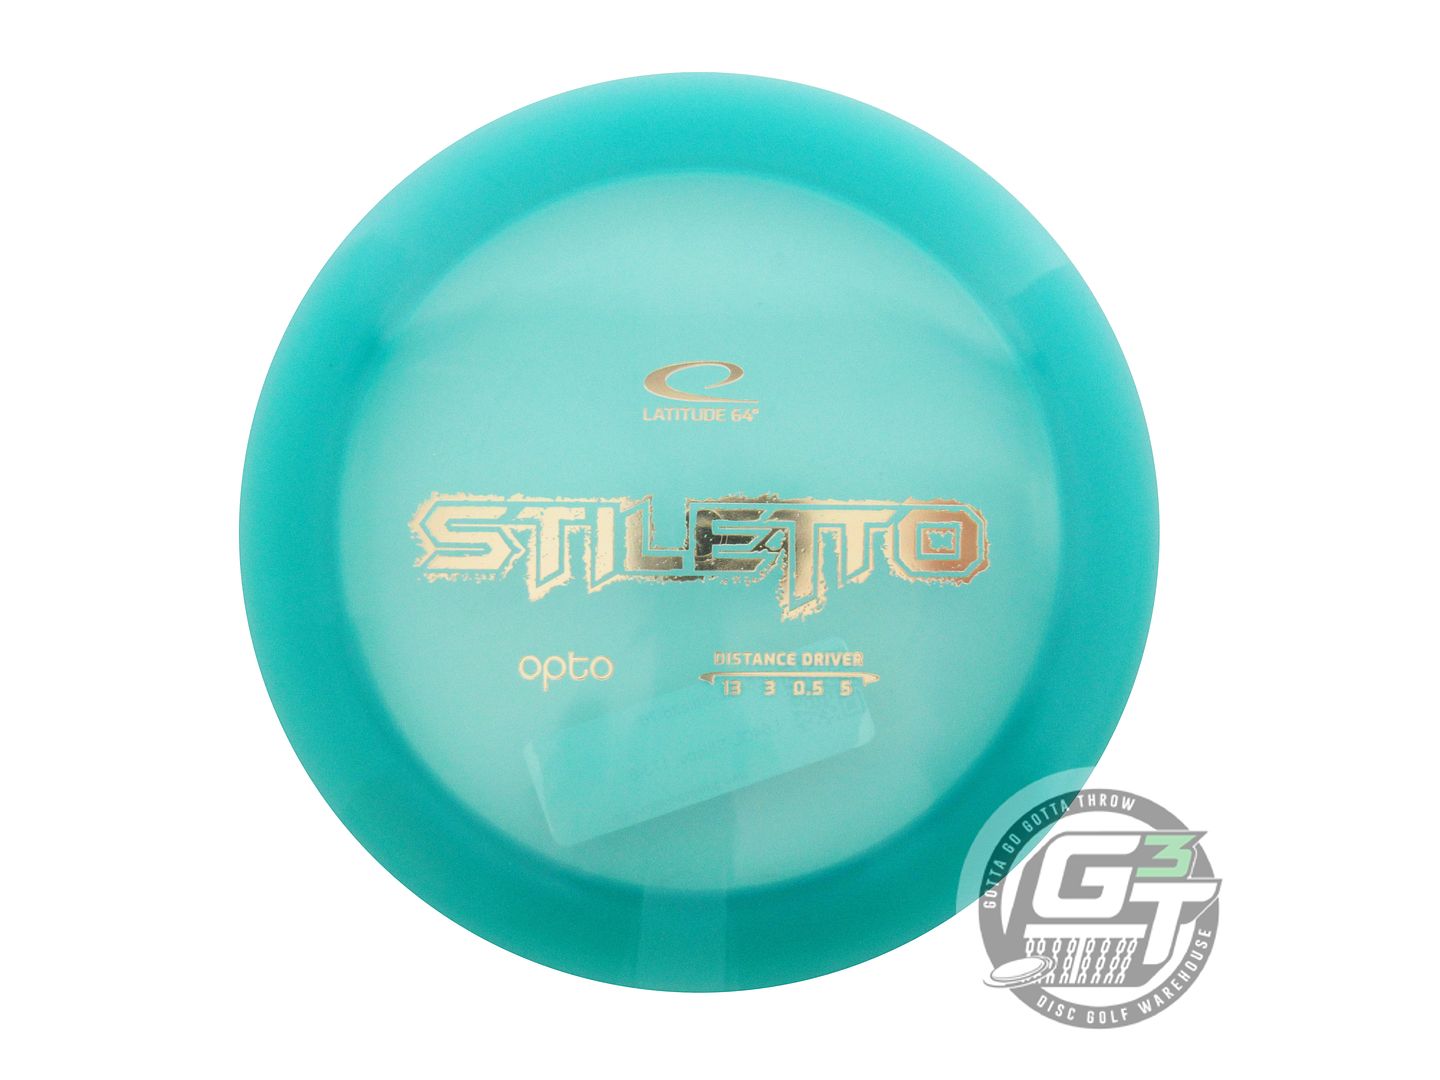 Latitude 64 Opto Line Stiletto Distance Driver Golf Disc (Individually Listed)